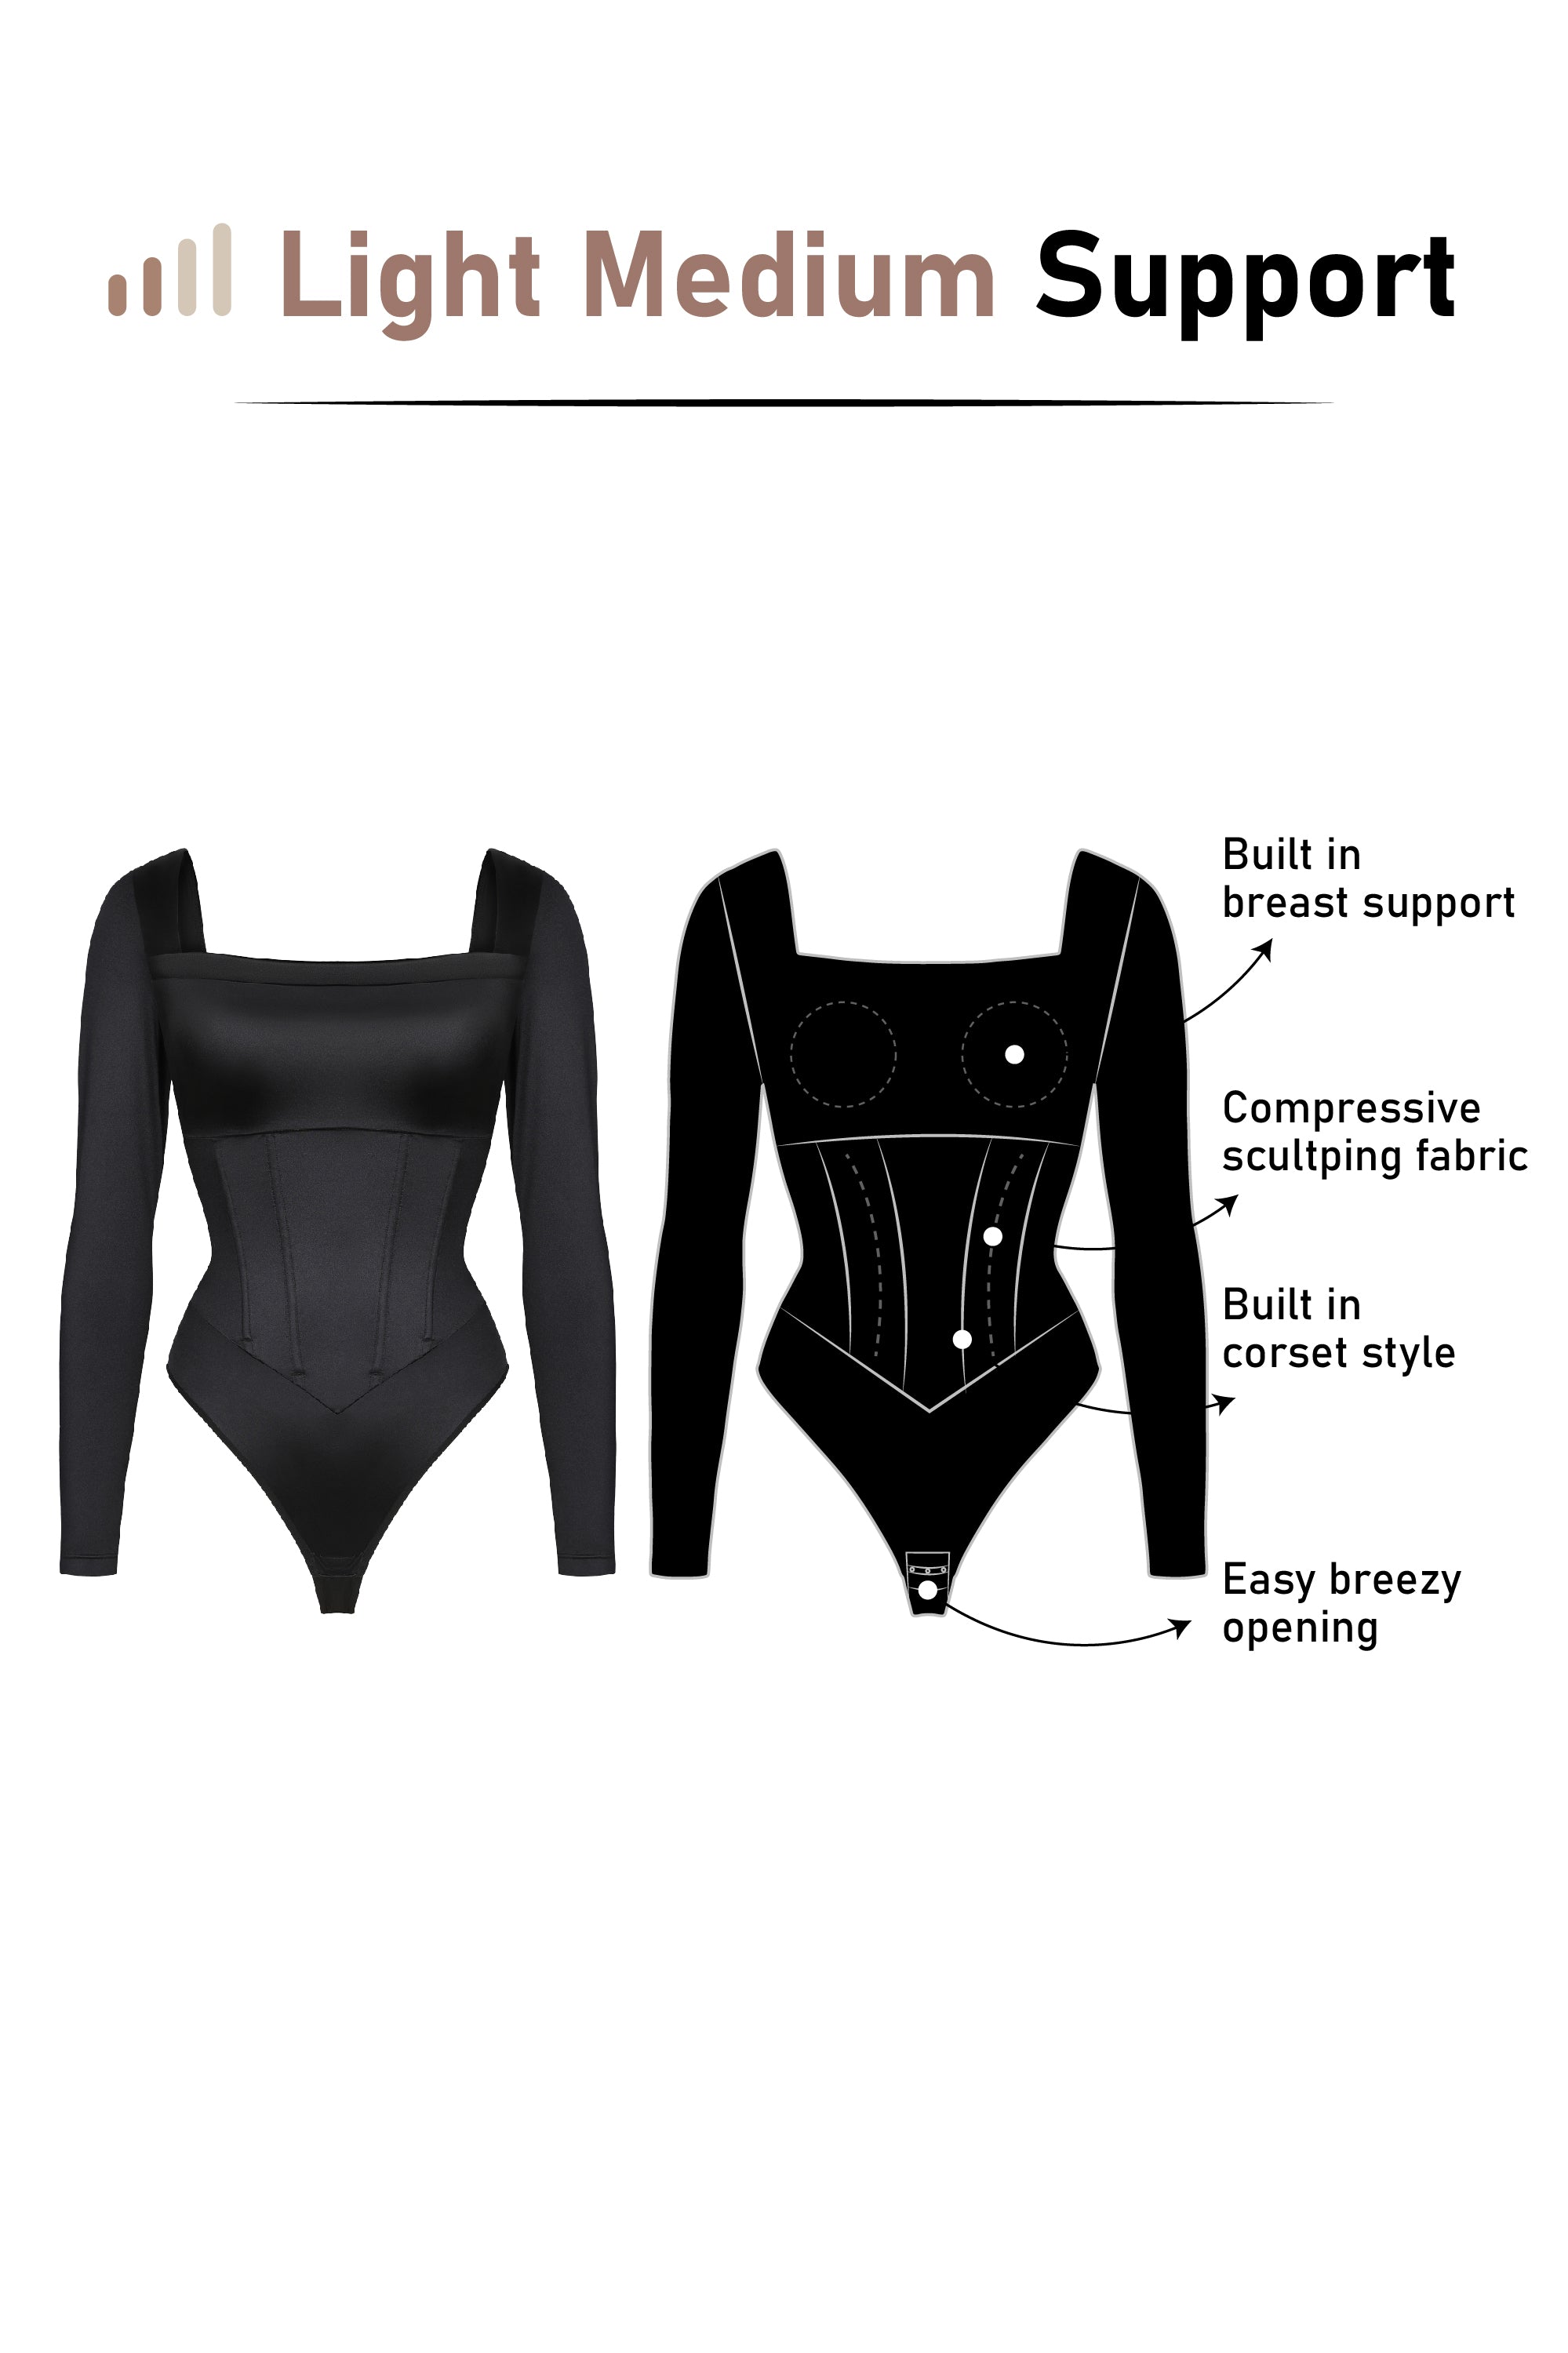 What do you think of this style of shapewear from @Conturve ? Use cod